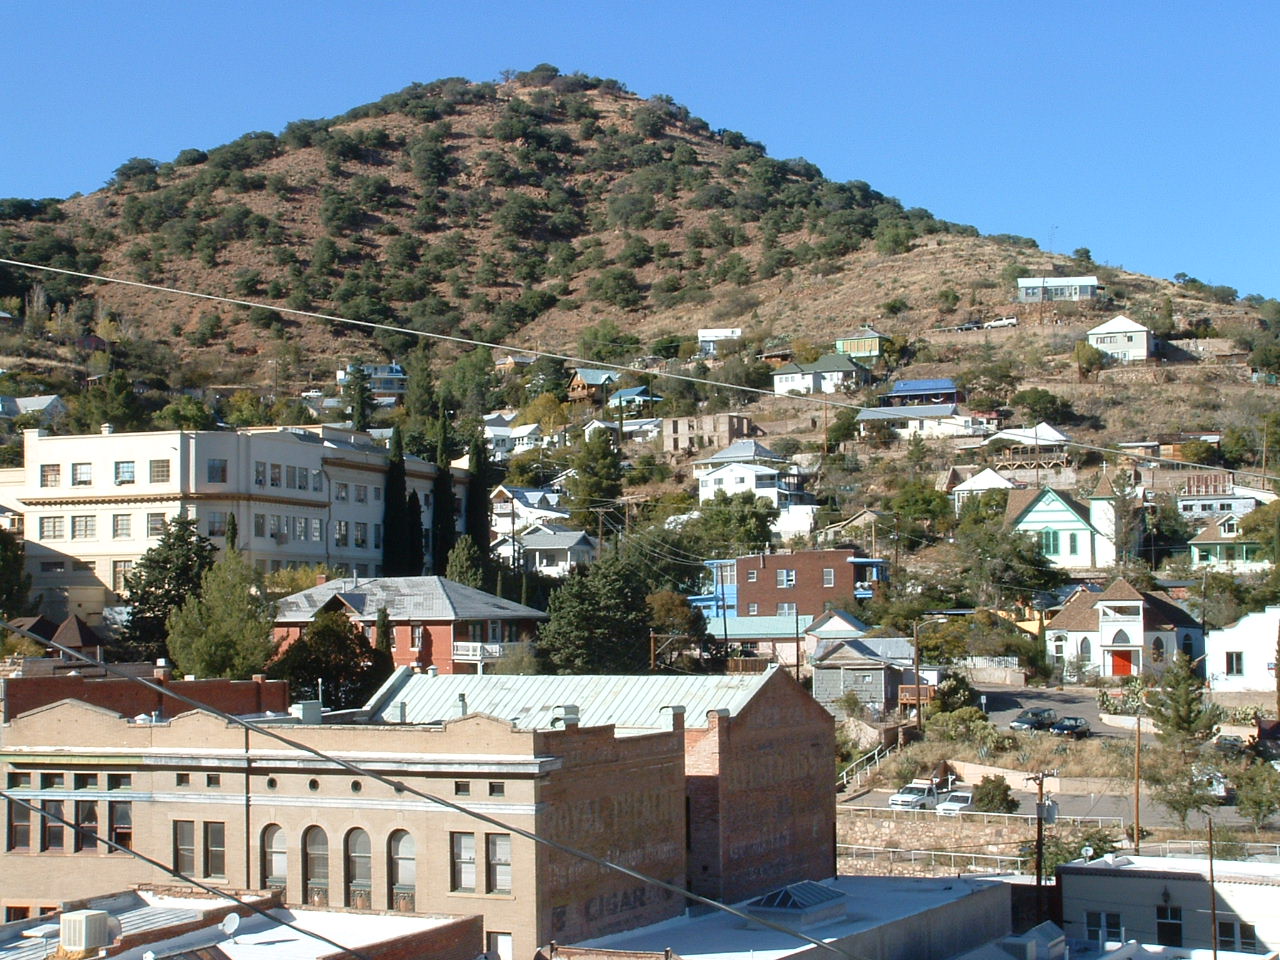 Old Bisbee from Highway 80